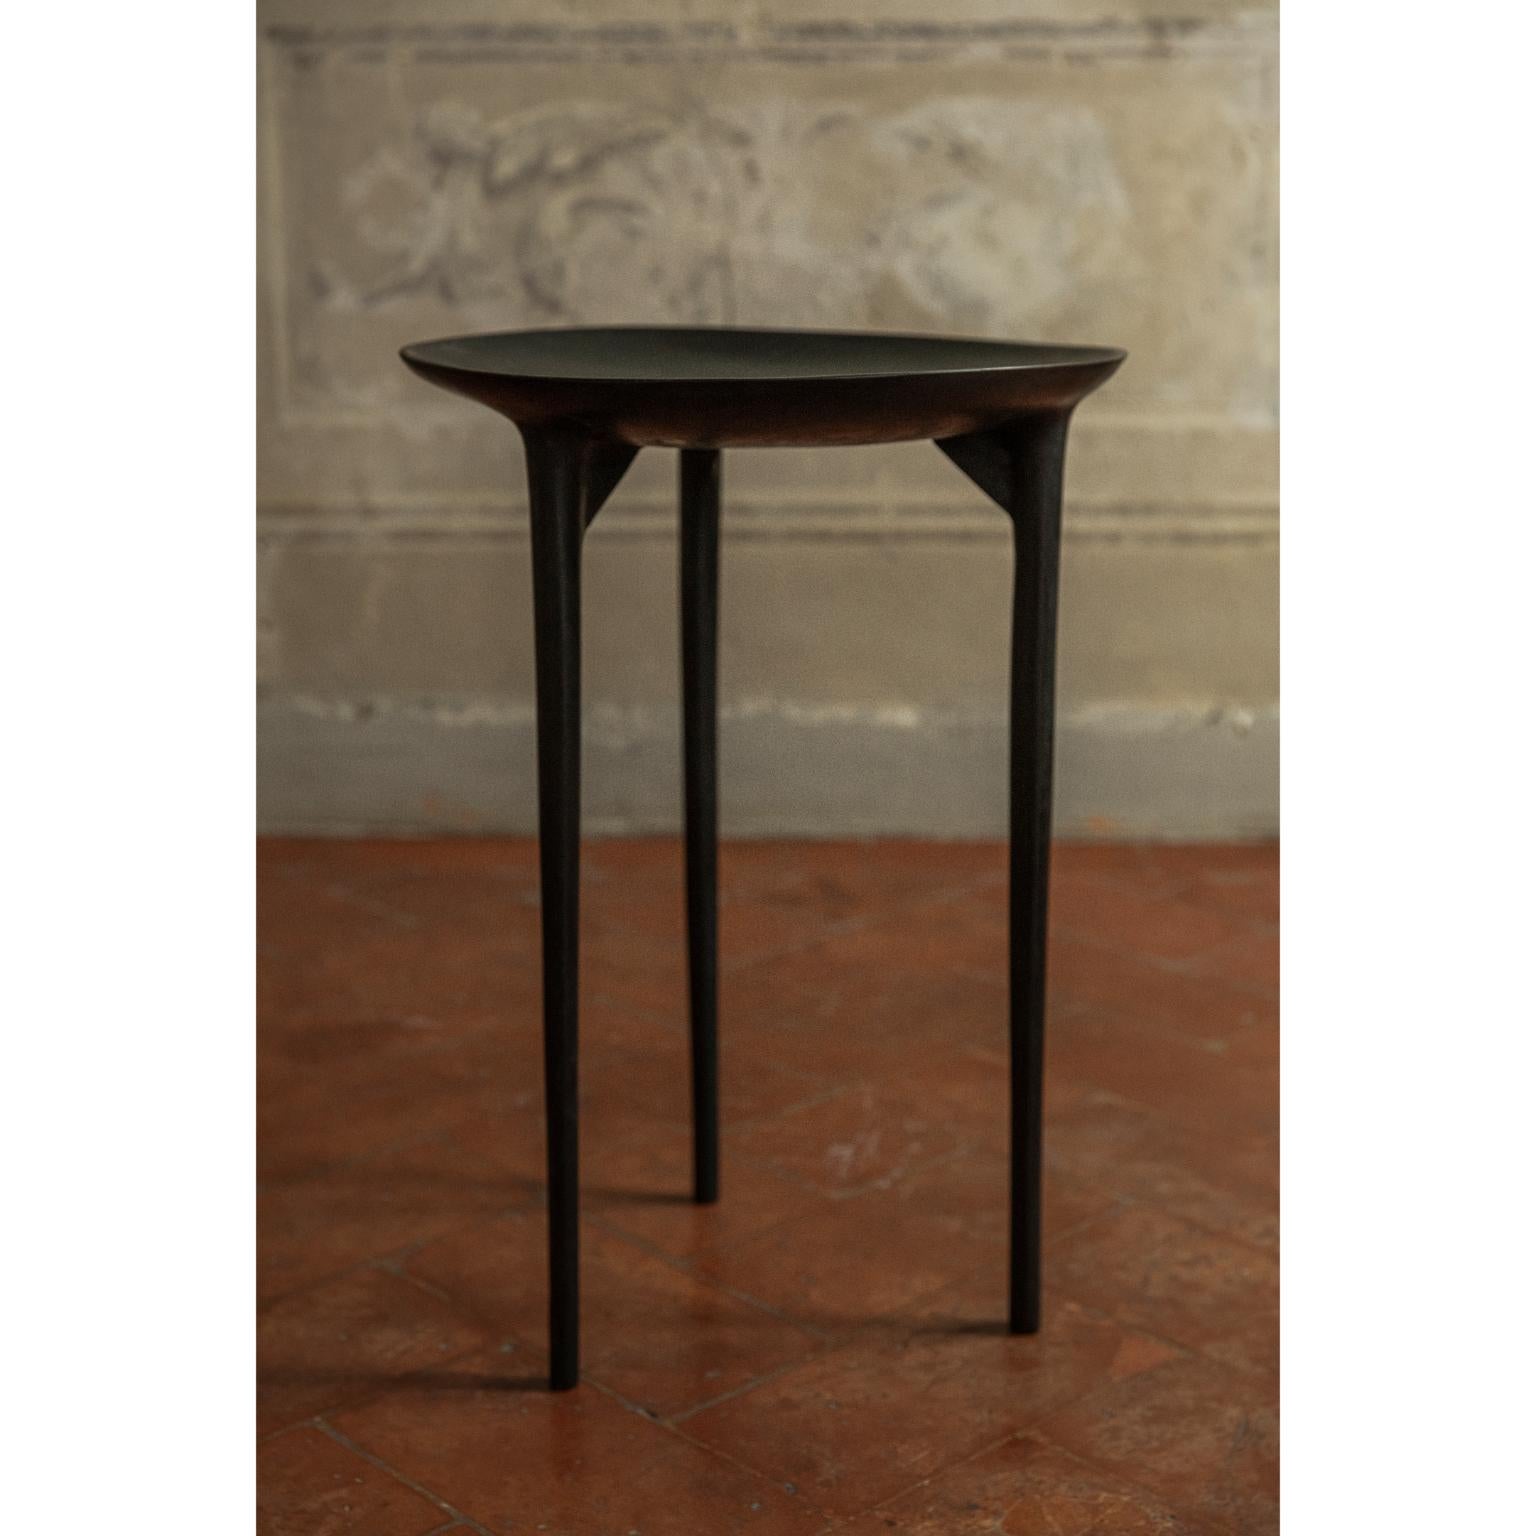 Tall brazier table by Rick Owens
2007
Dimensions: L 42 x W 42 x H 59 cm
Materials: Bronze
Weight: 25 kg

Available in black finish or Nitrate (Dark Brown) finish.

Rick Owens is a California-born fashion and furniture has developed a unique